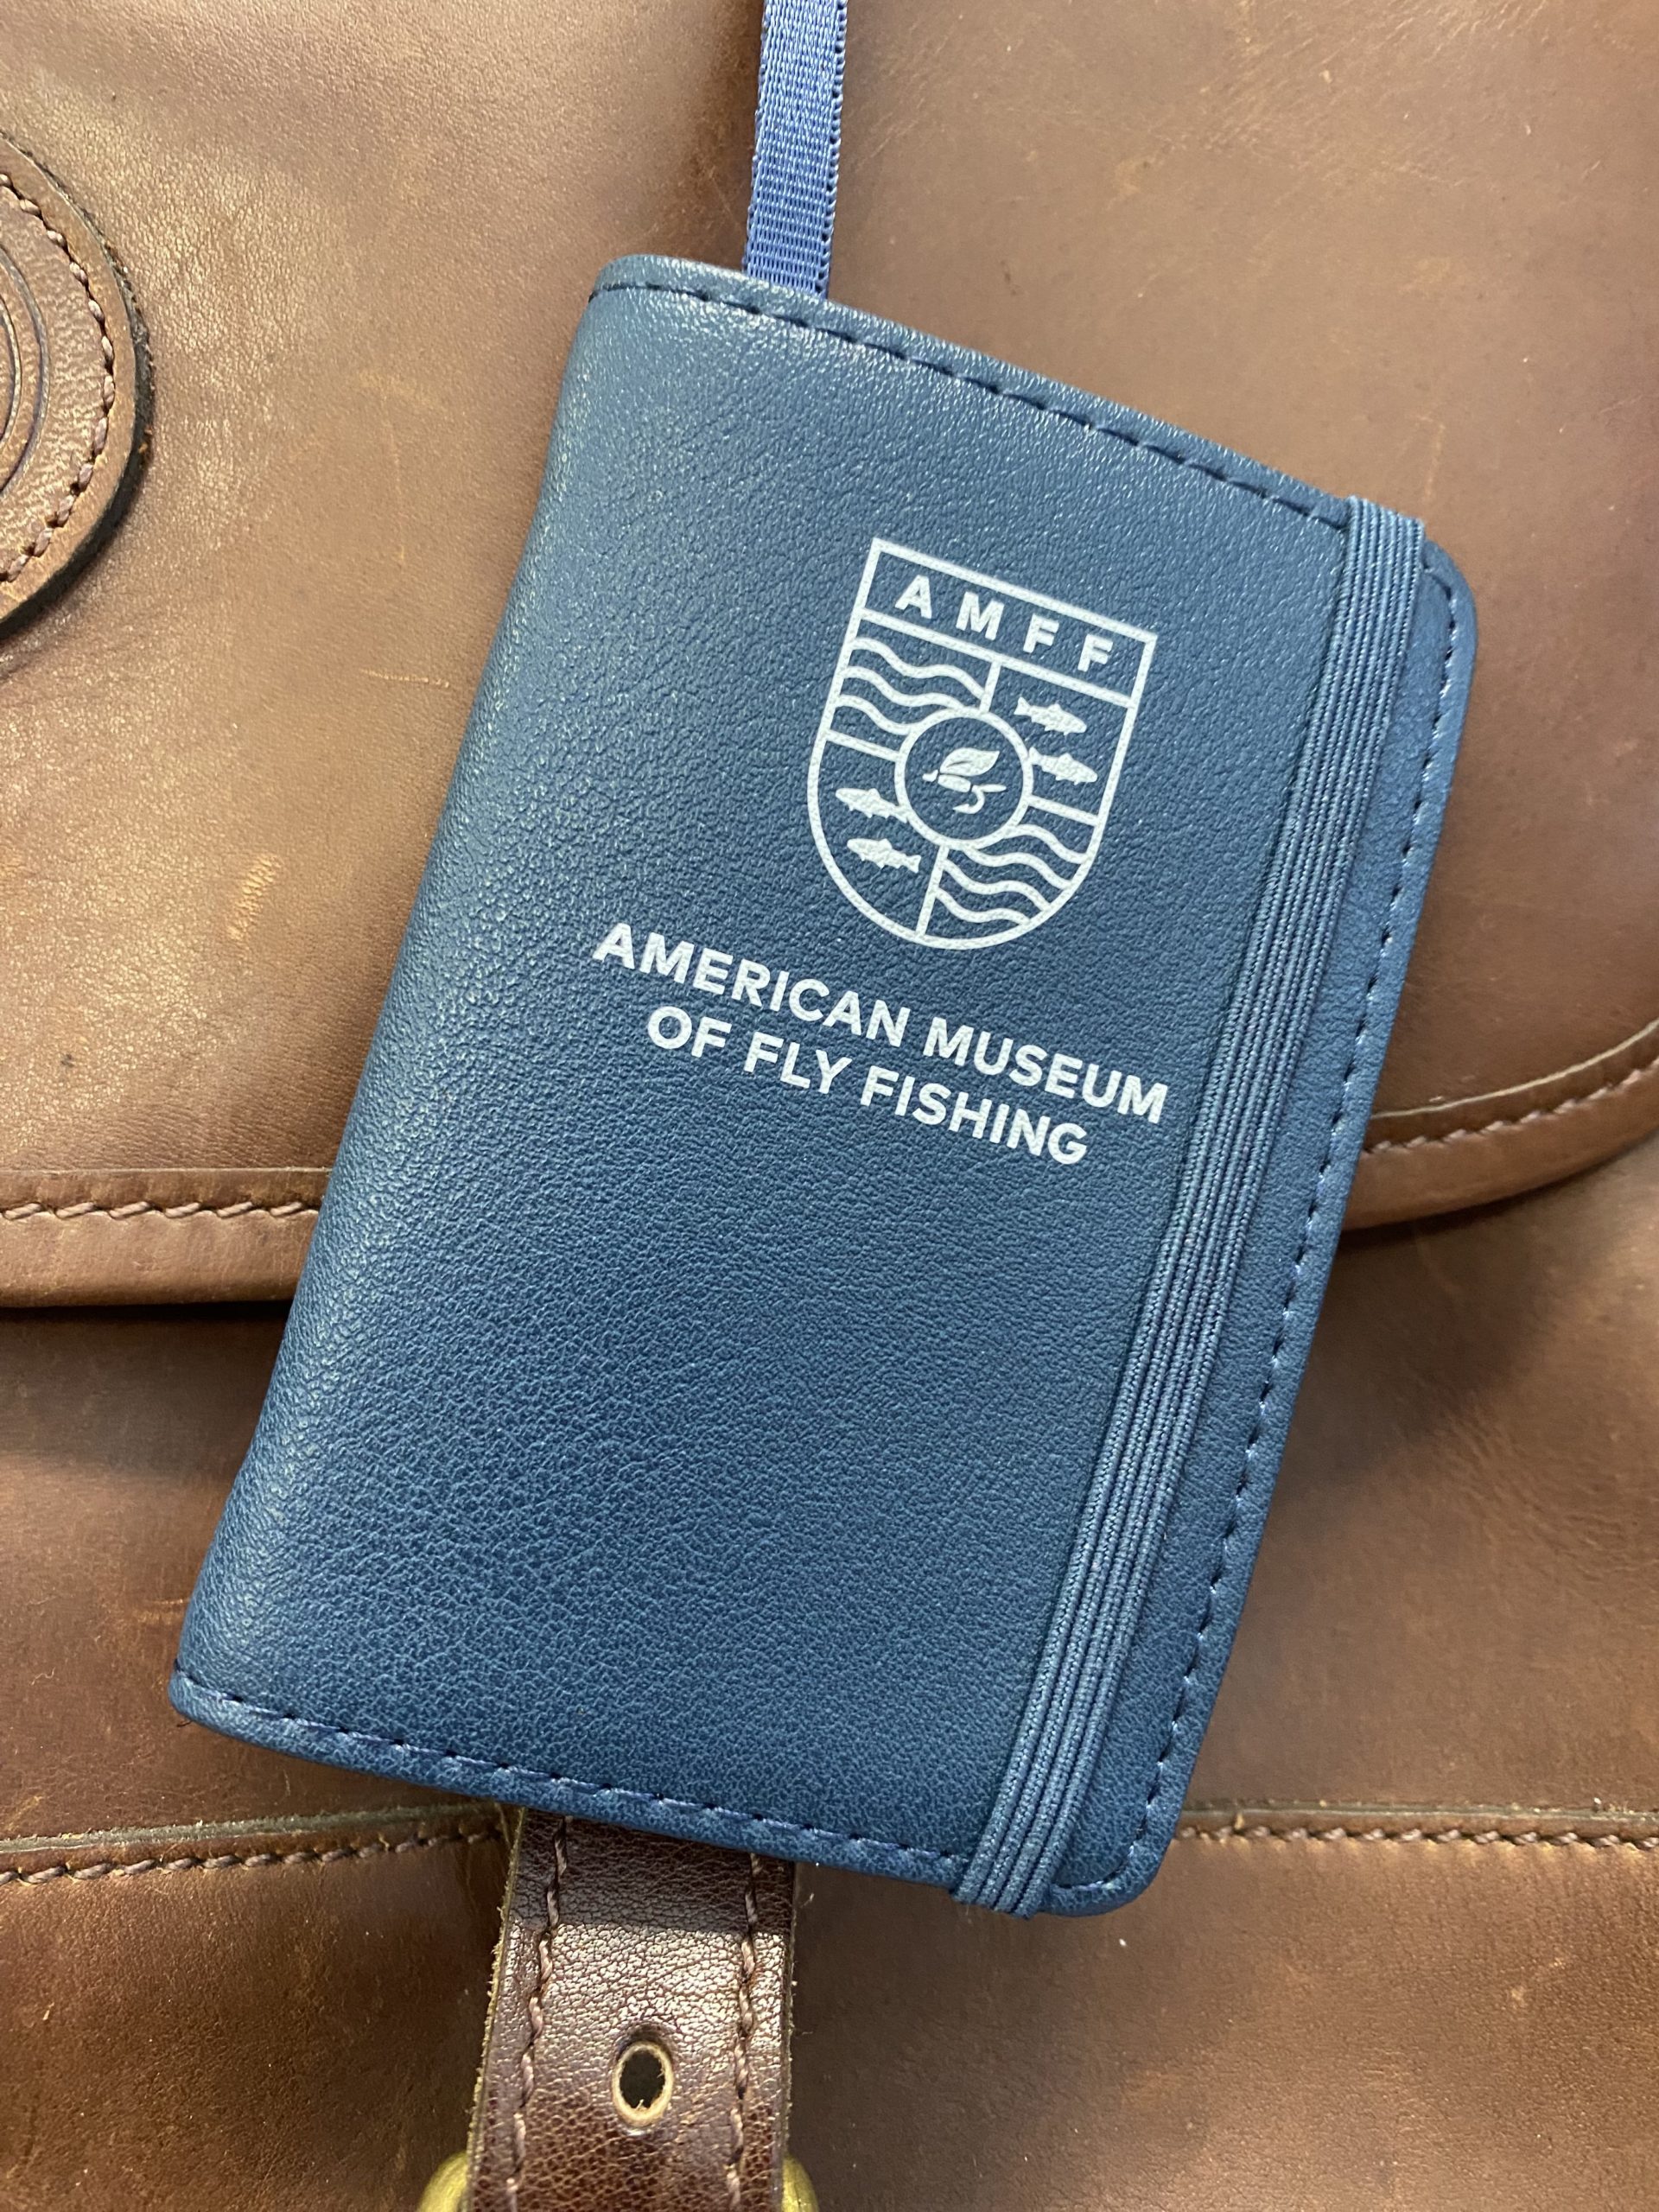 AMFF Logo Luggage Tags - American Museum Of Fly Fishing